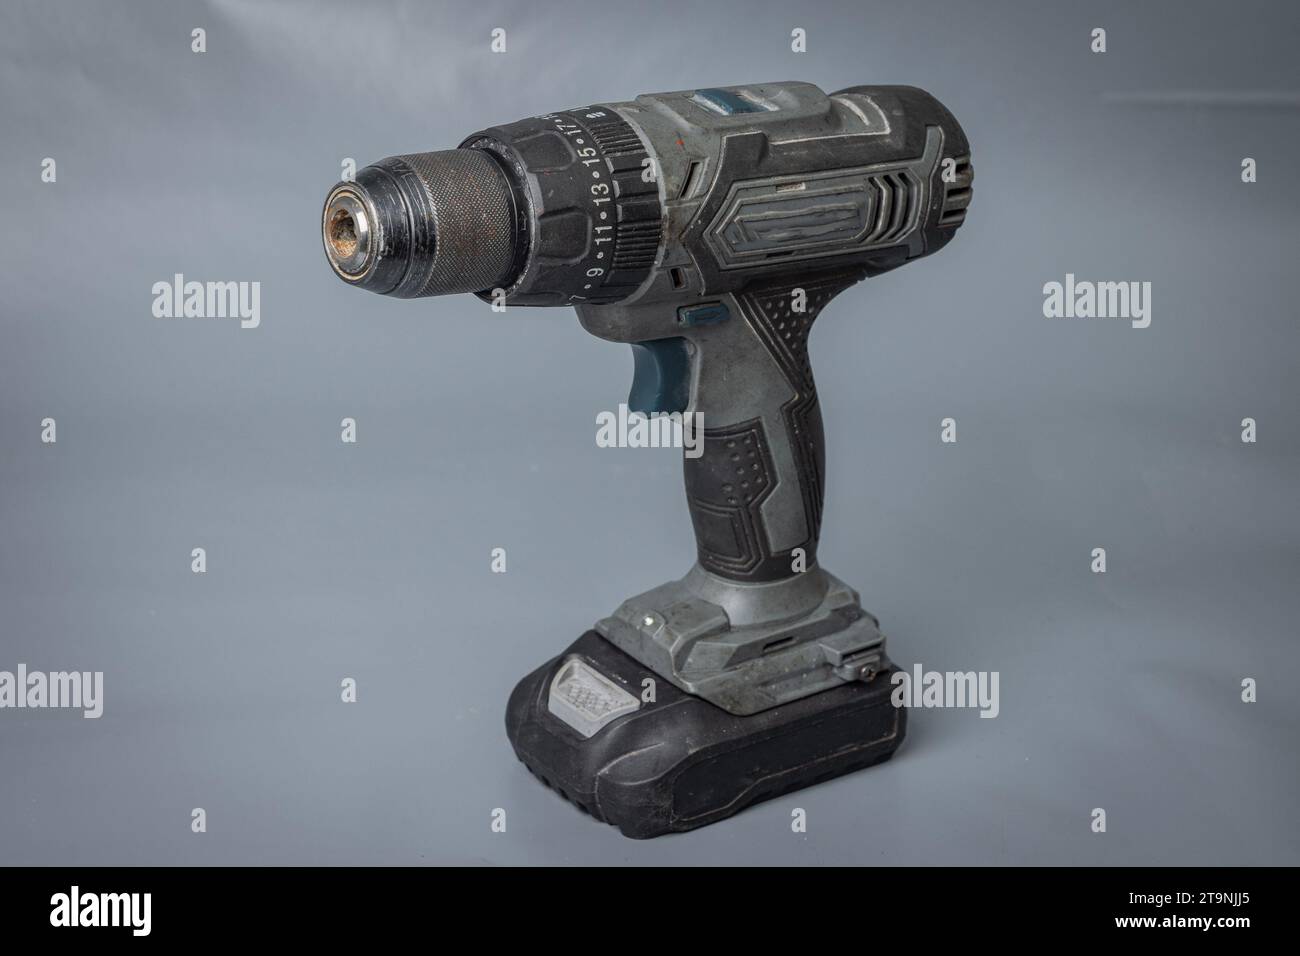 https://c8.alamy.com/comp/2T9NJJ5/cordless-battery-powered-drill-or-screwdriver-practical-machine-without-electric-cable-for-drilling-and-screwing-in-screws-isolated-on-gray-2T9NJJ5.jpg